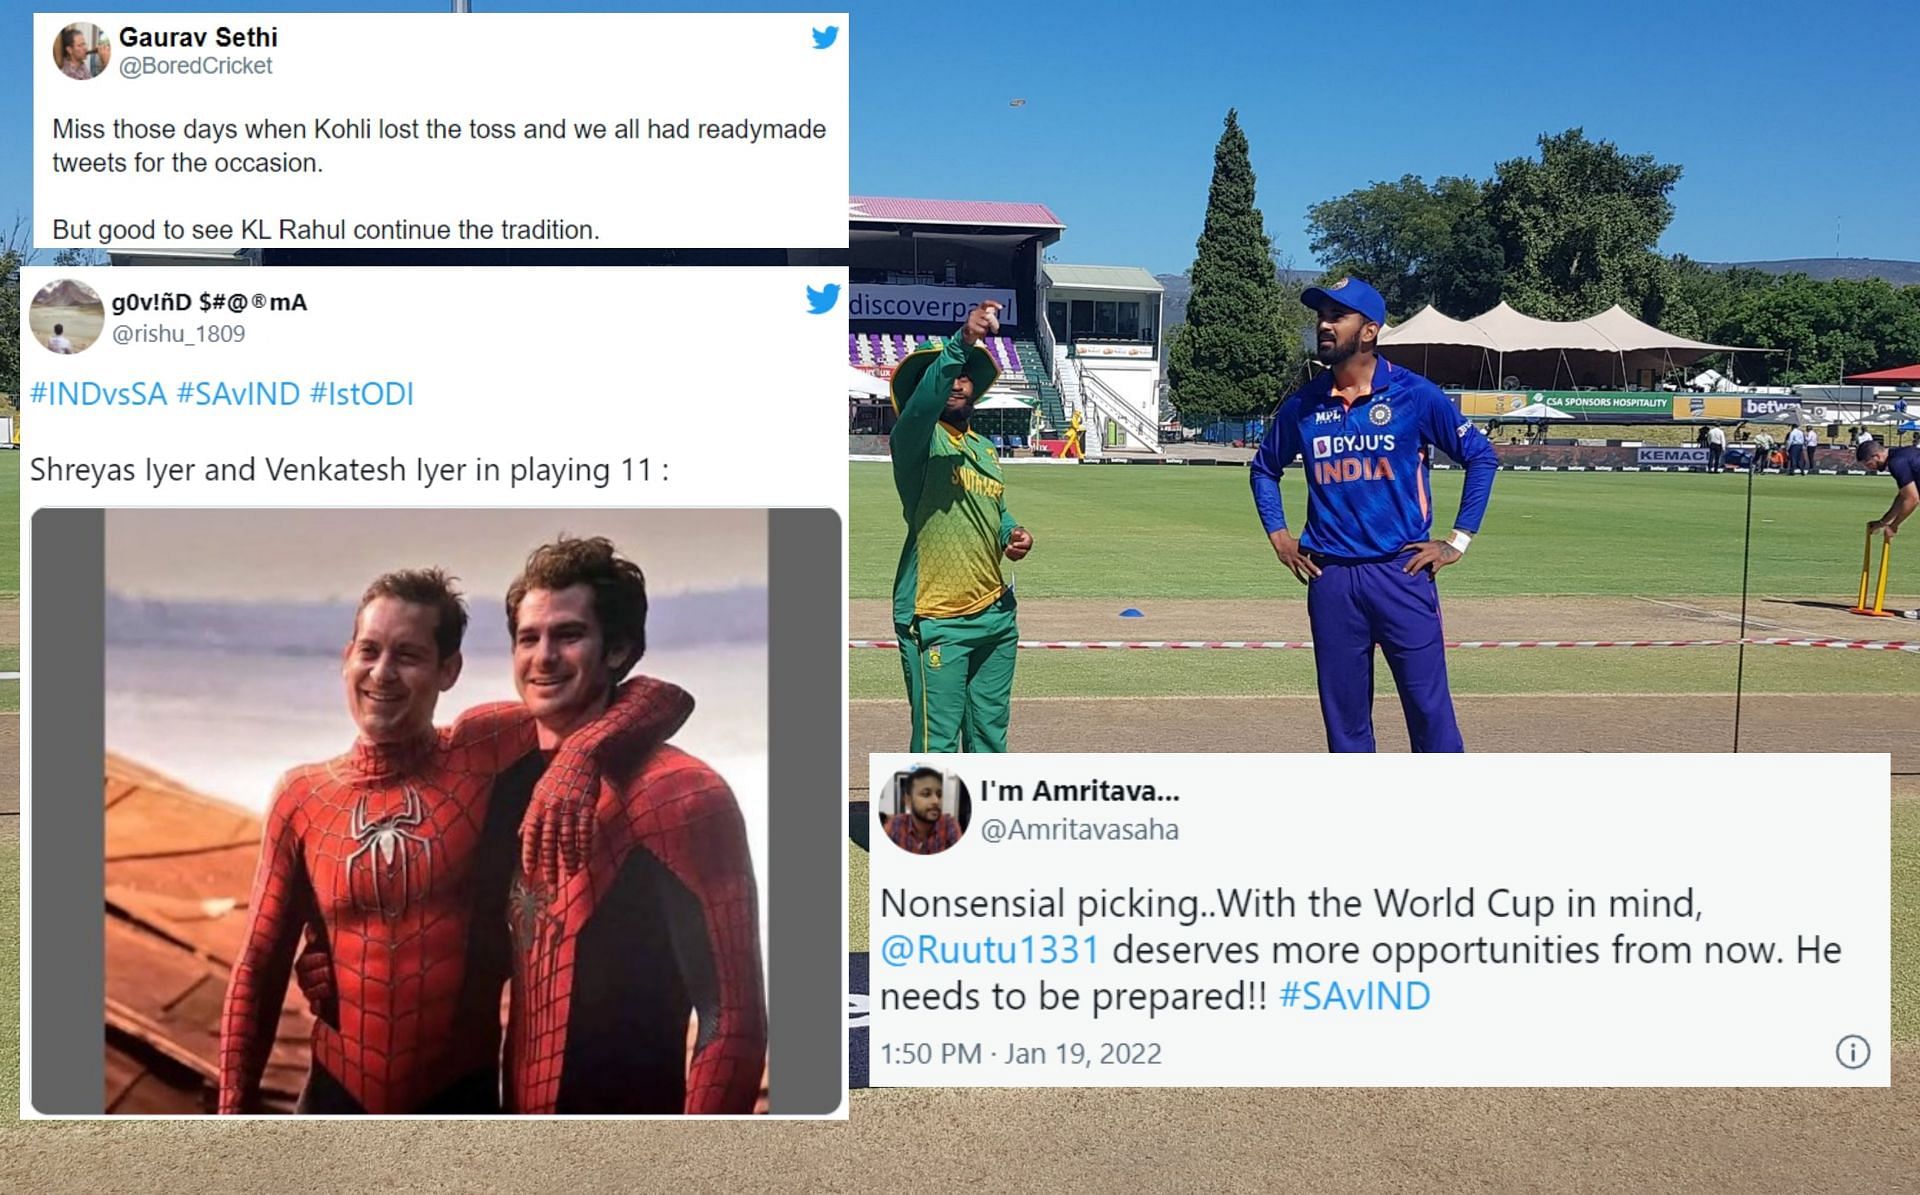 Twitterati react after the toss in the first ODI between India and South Africa in Paarl